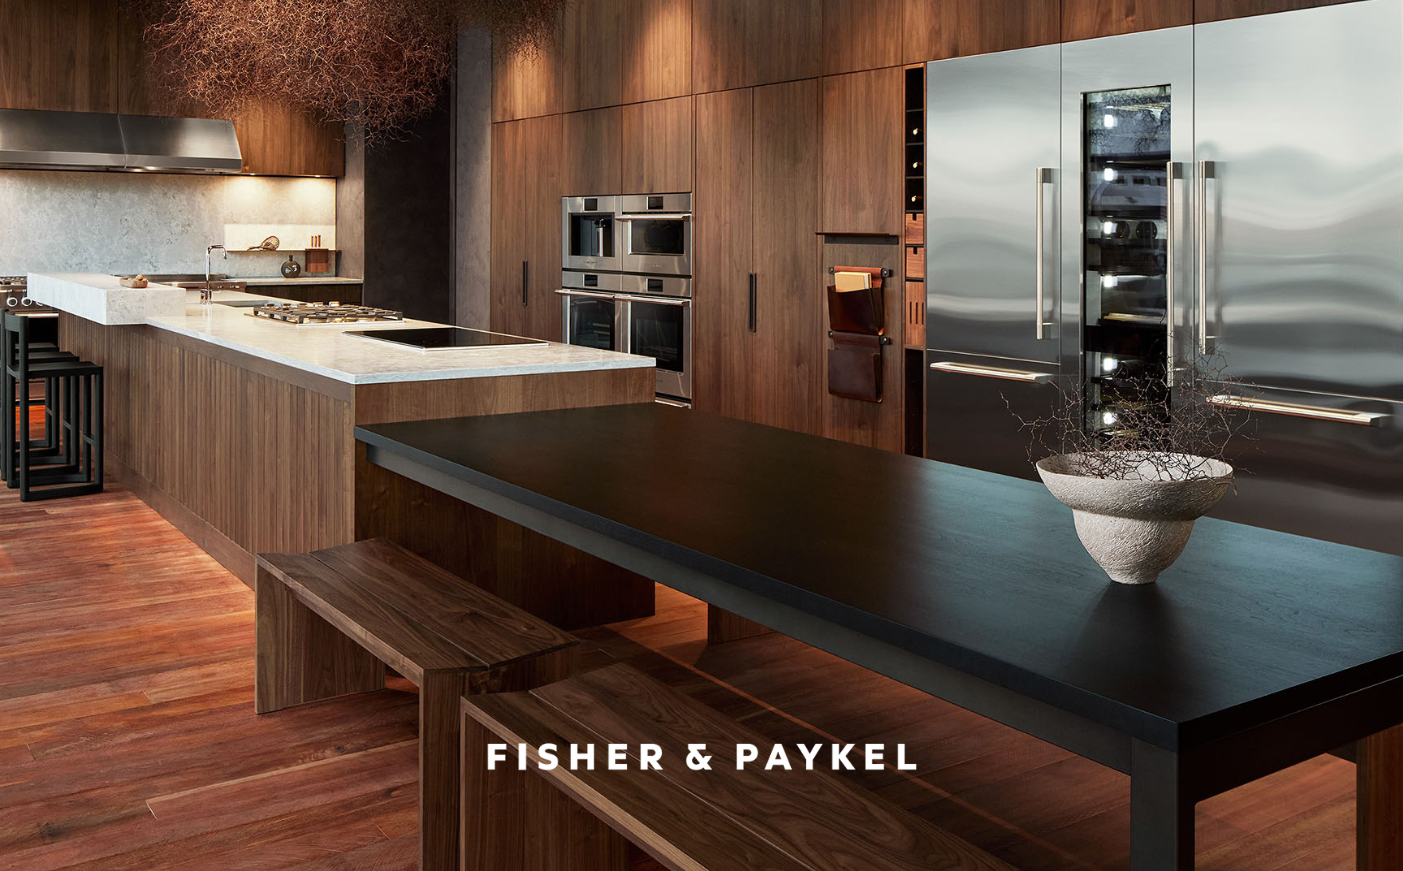 Fisher & Paykel Beauty Of Choice Jul 1 - Dec 31, 2024